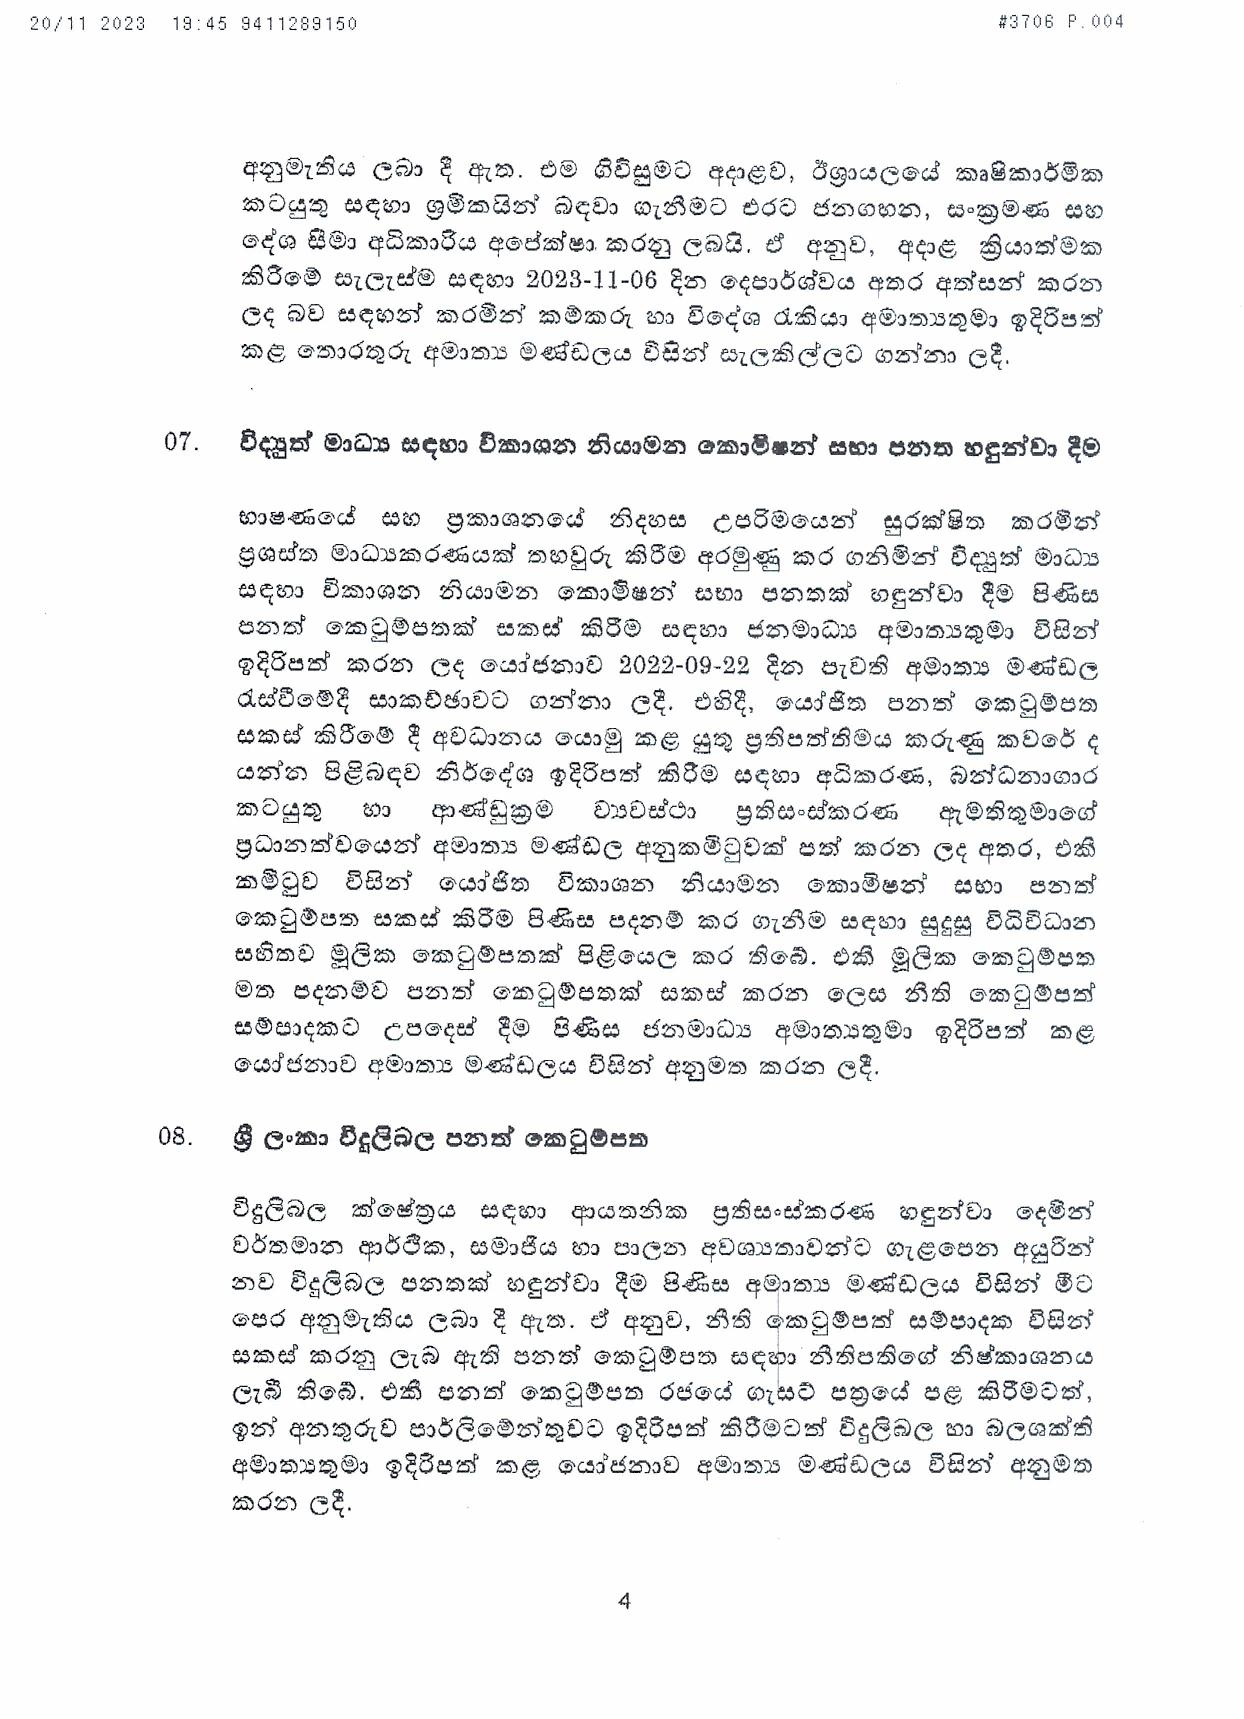 Cabinet Decisions on 20.11.2023 page 004